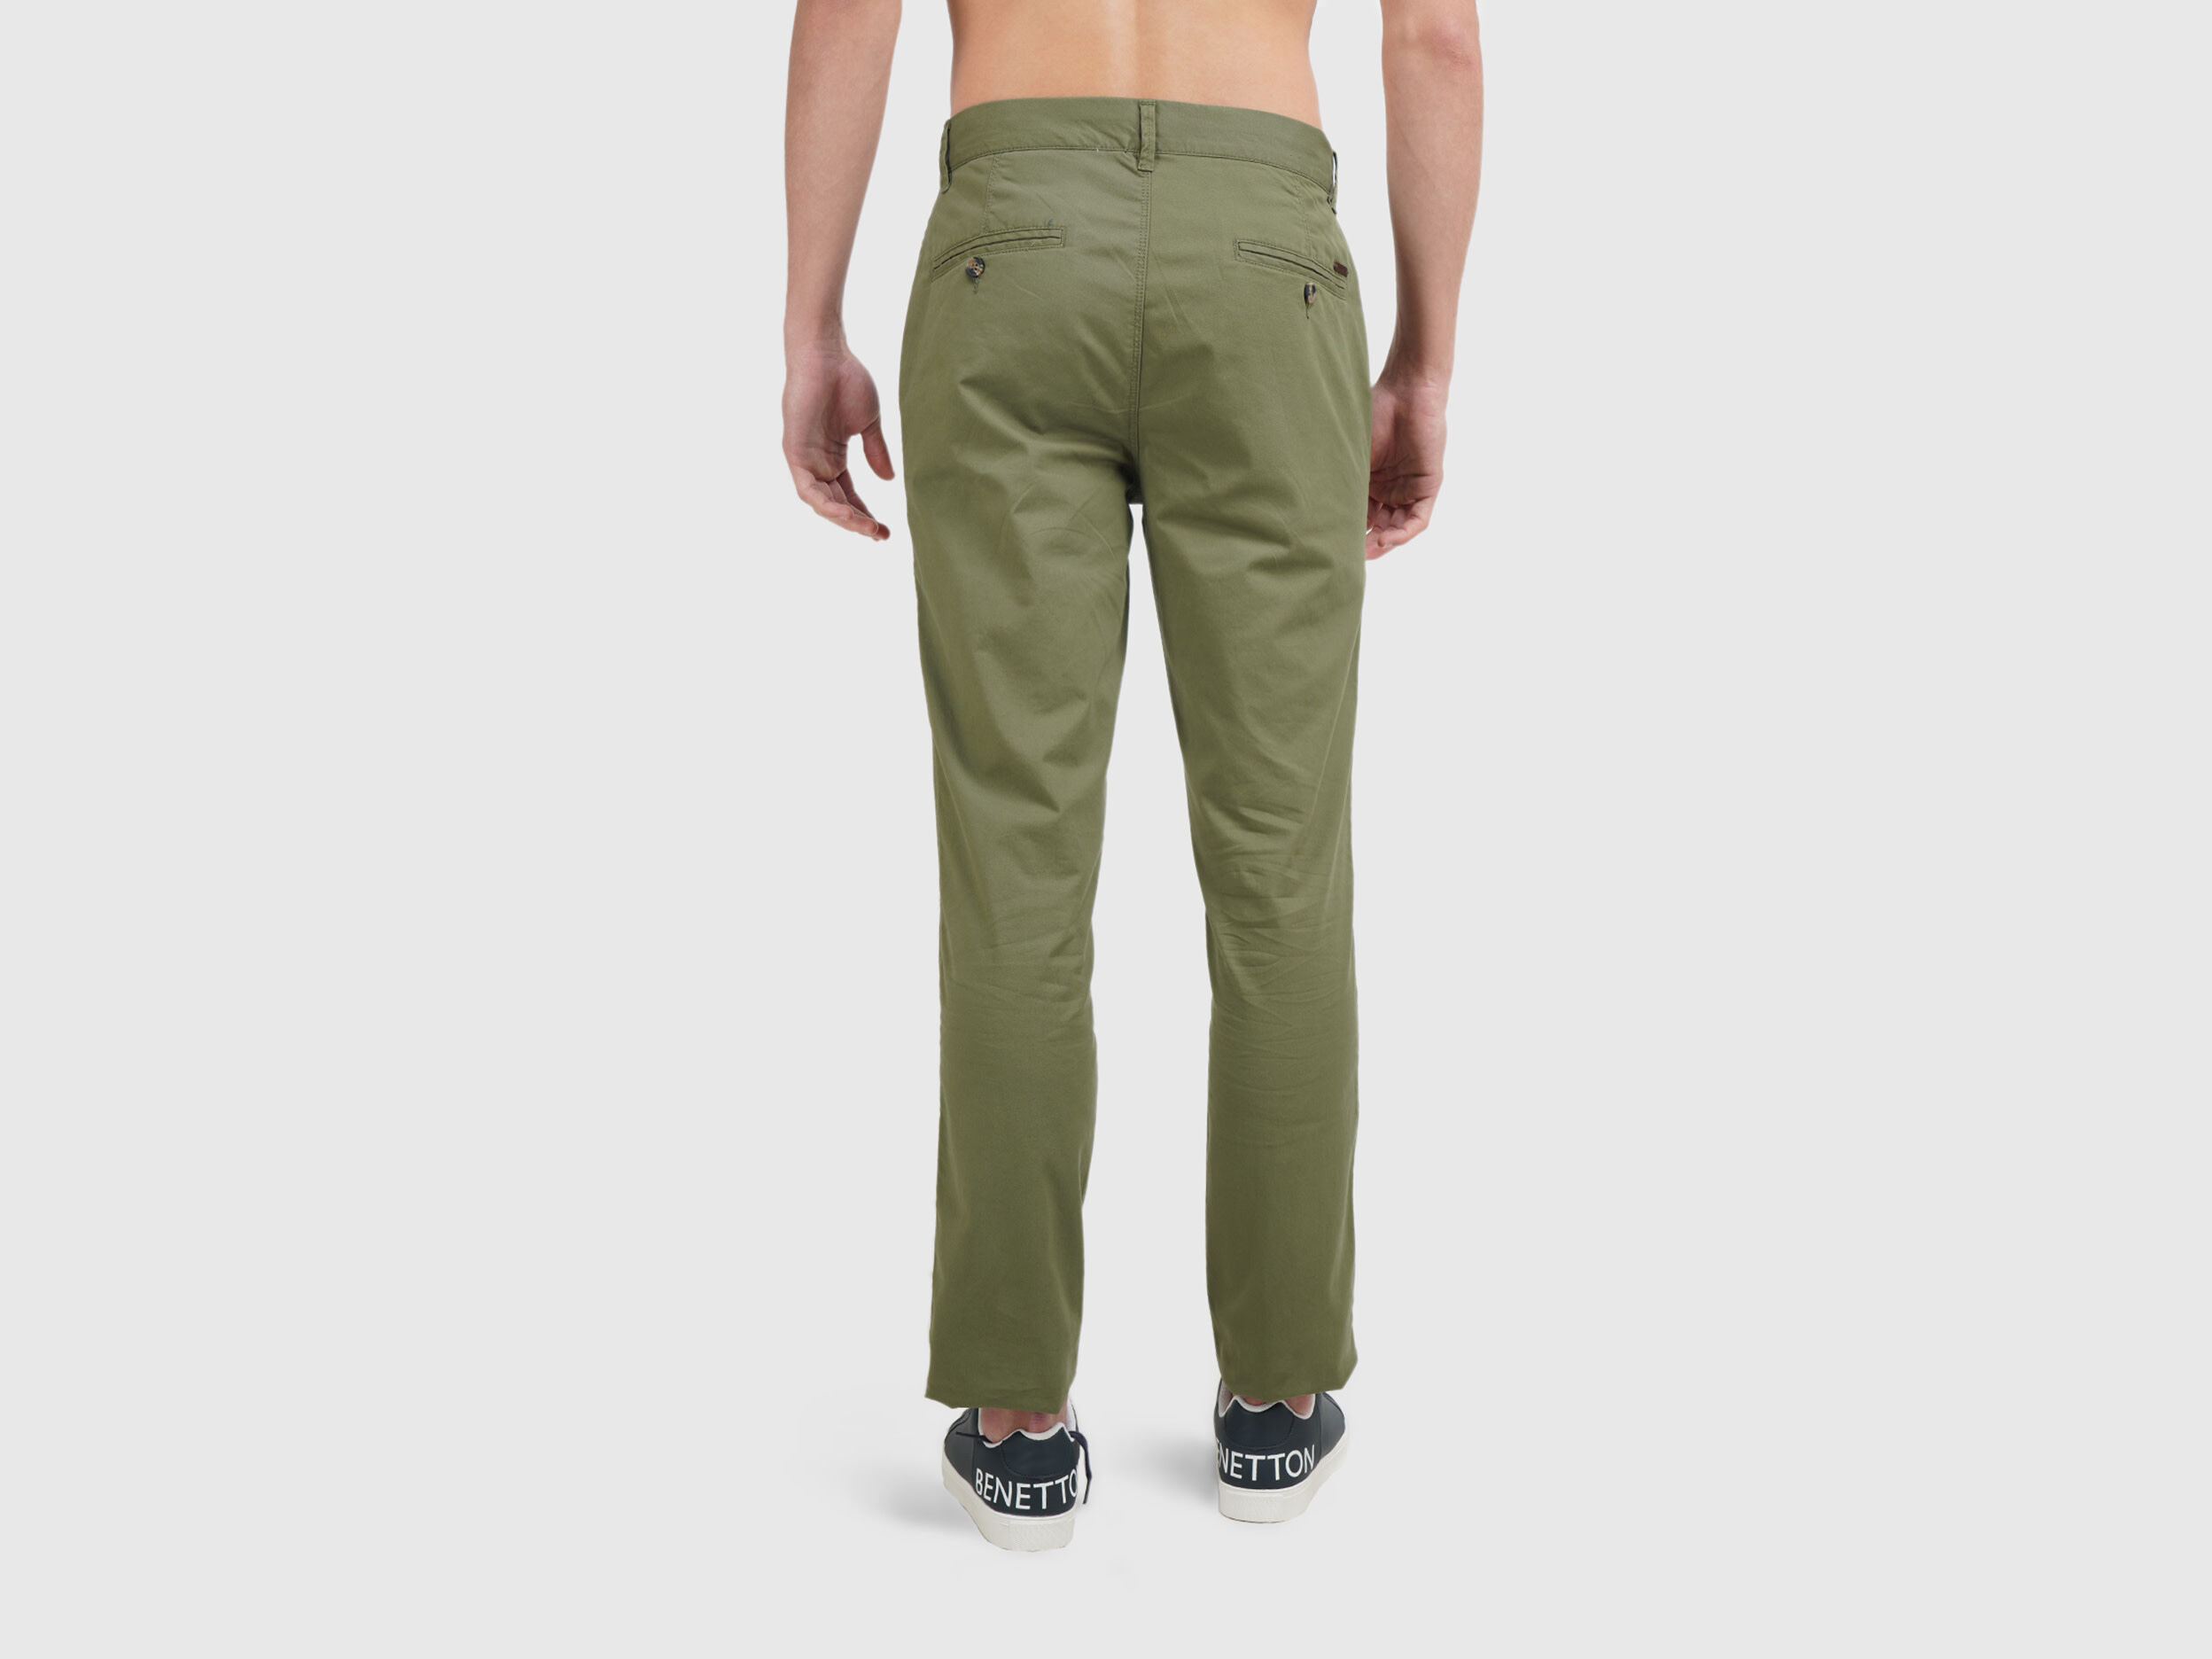 Blake Slim Straight Twill Pant in Light Ash by Hudson Jeans – The Perfect  Provenance